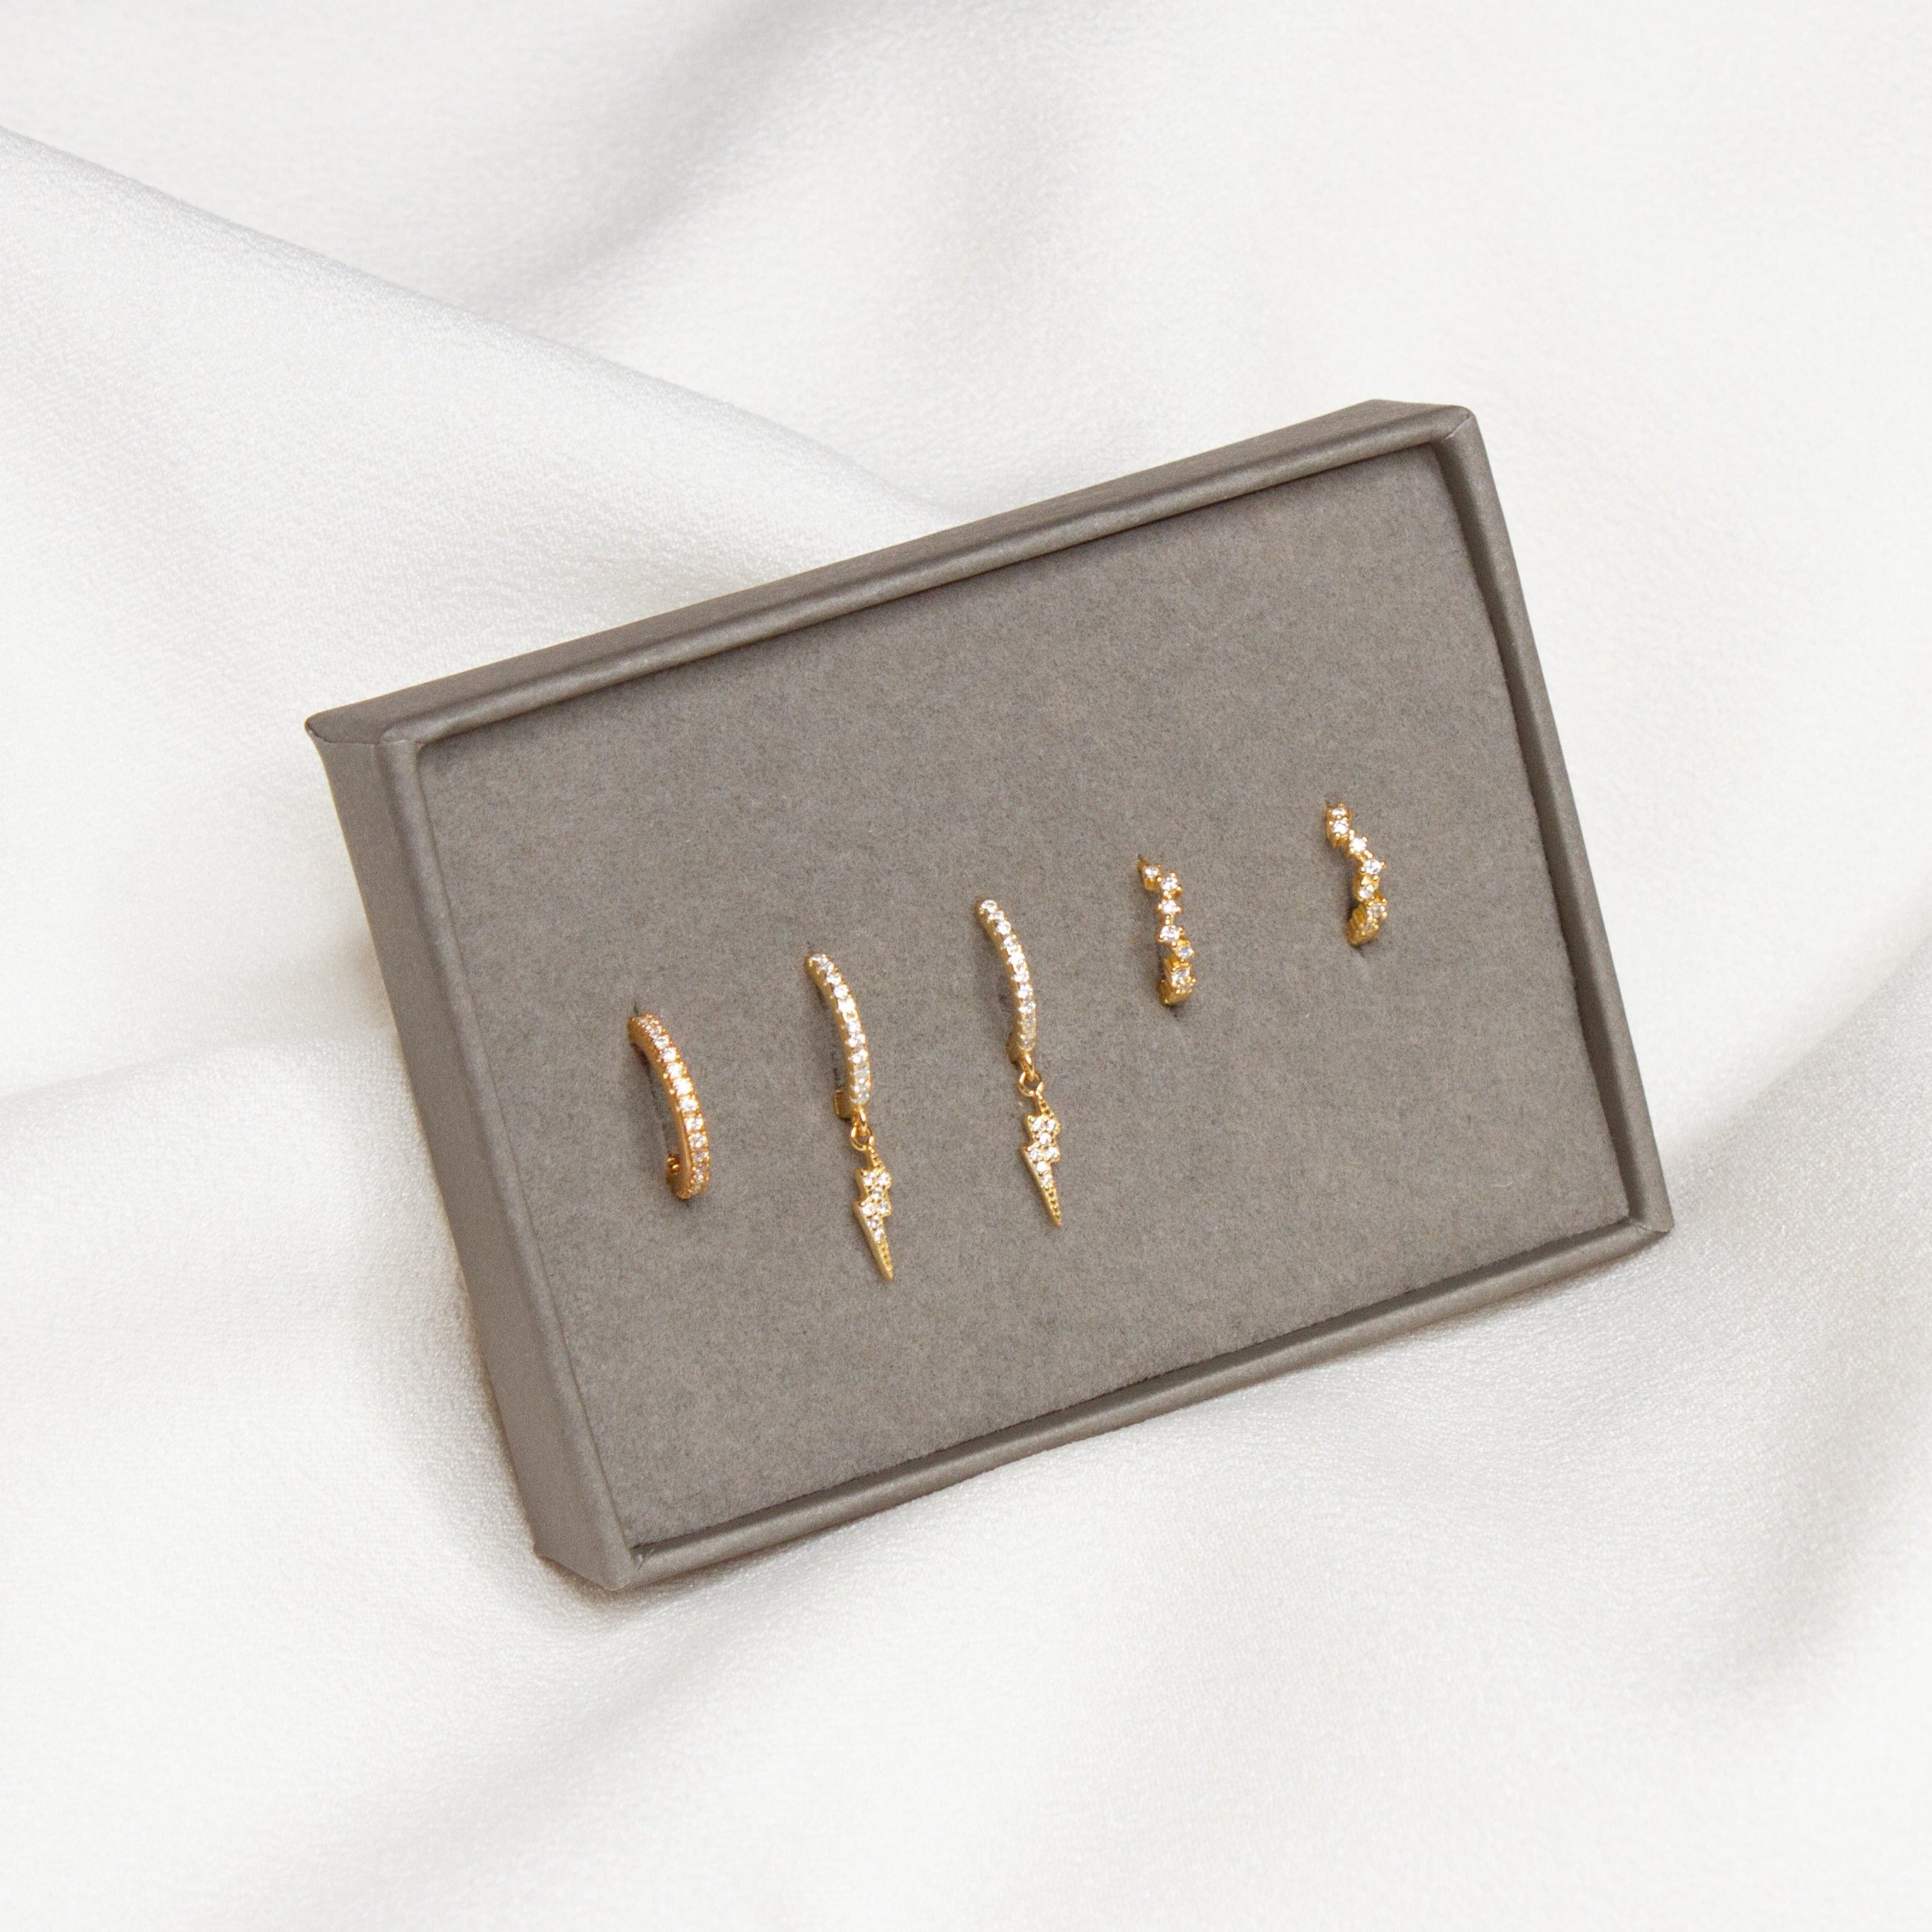 Bestsellers Ear Stacking Set Gold